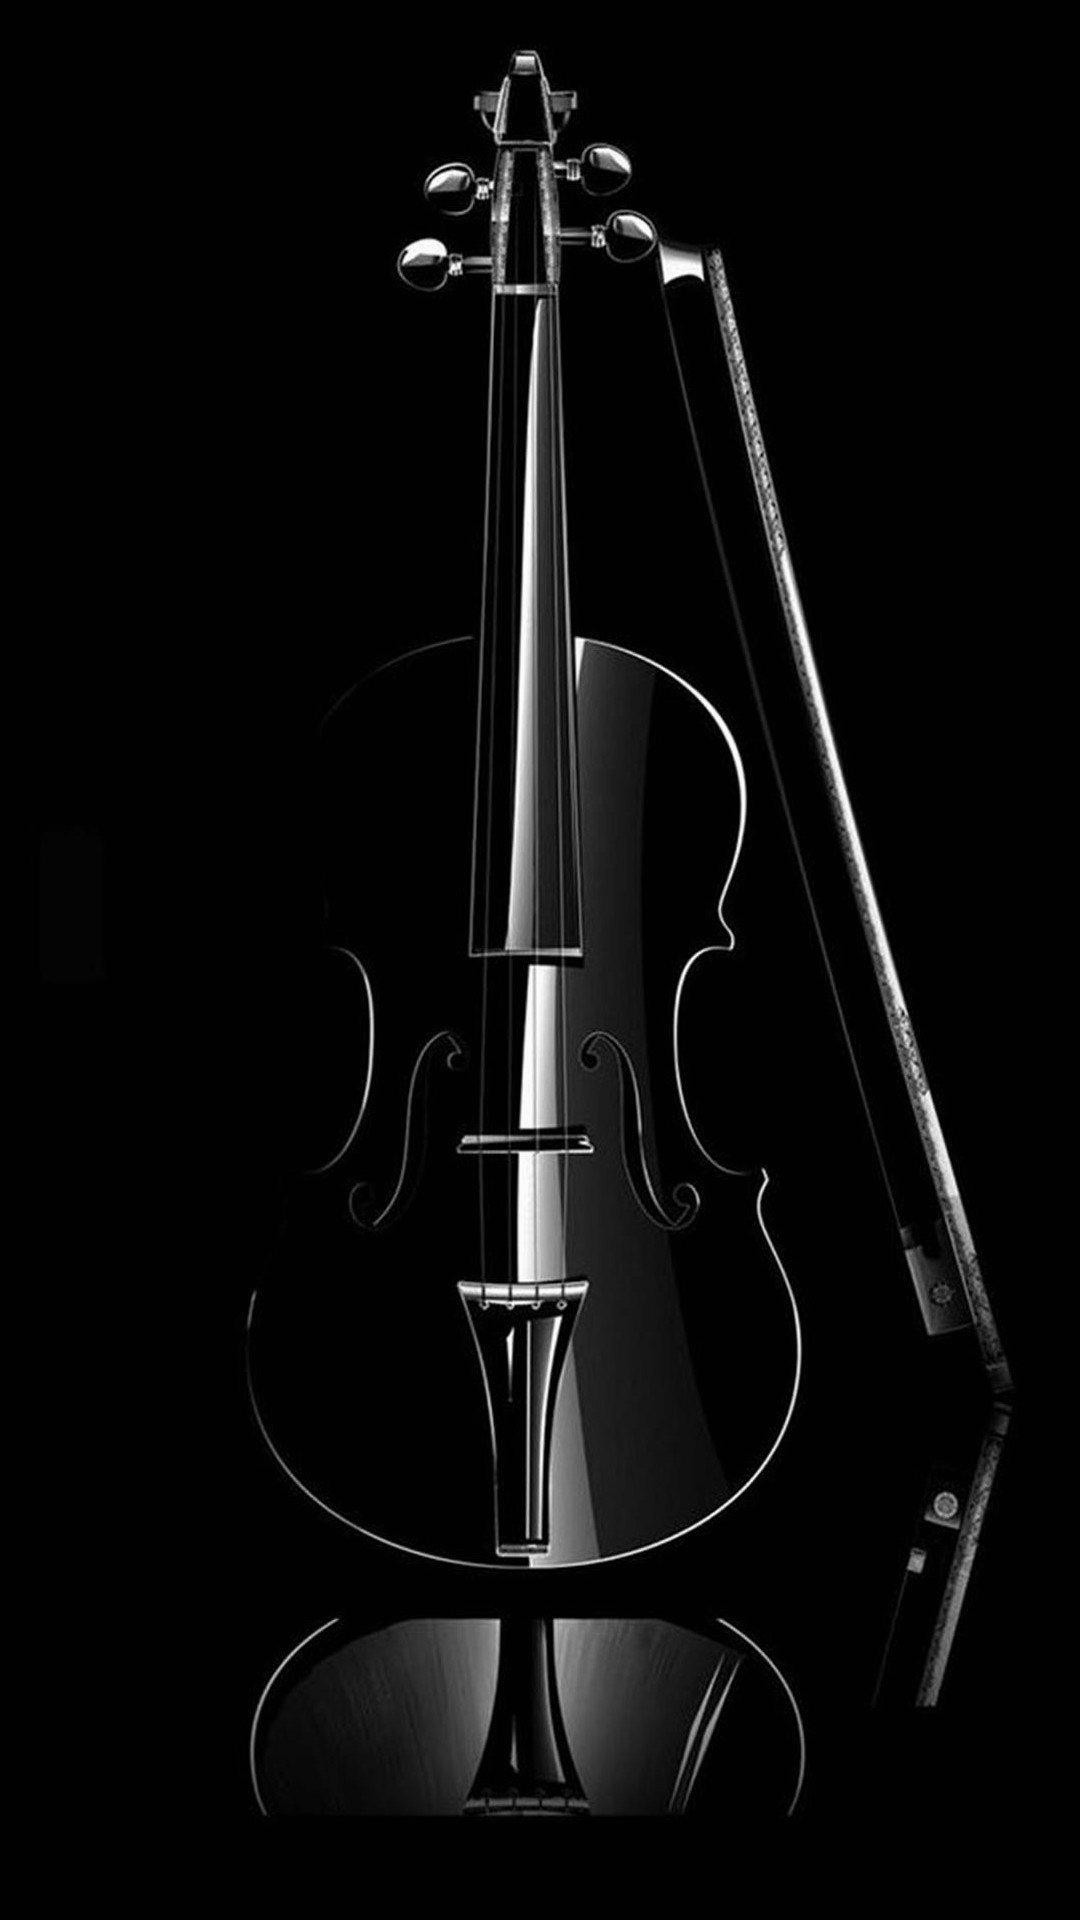 Best Wallpaper For Android Music Smartphone Classical Black Samsung S8